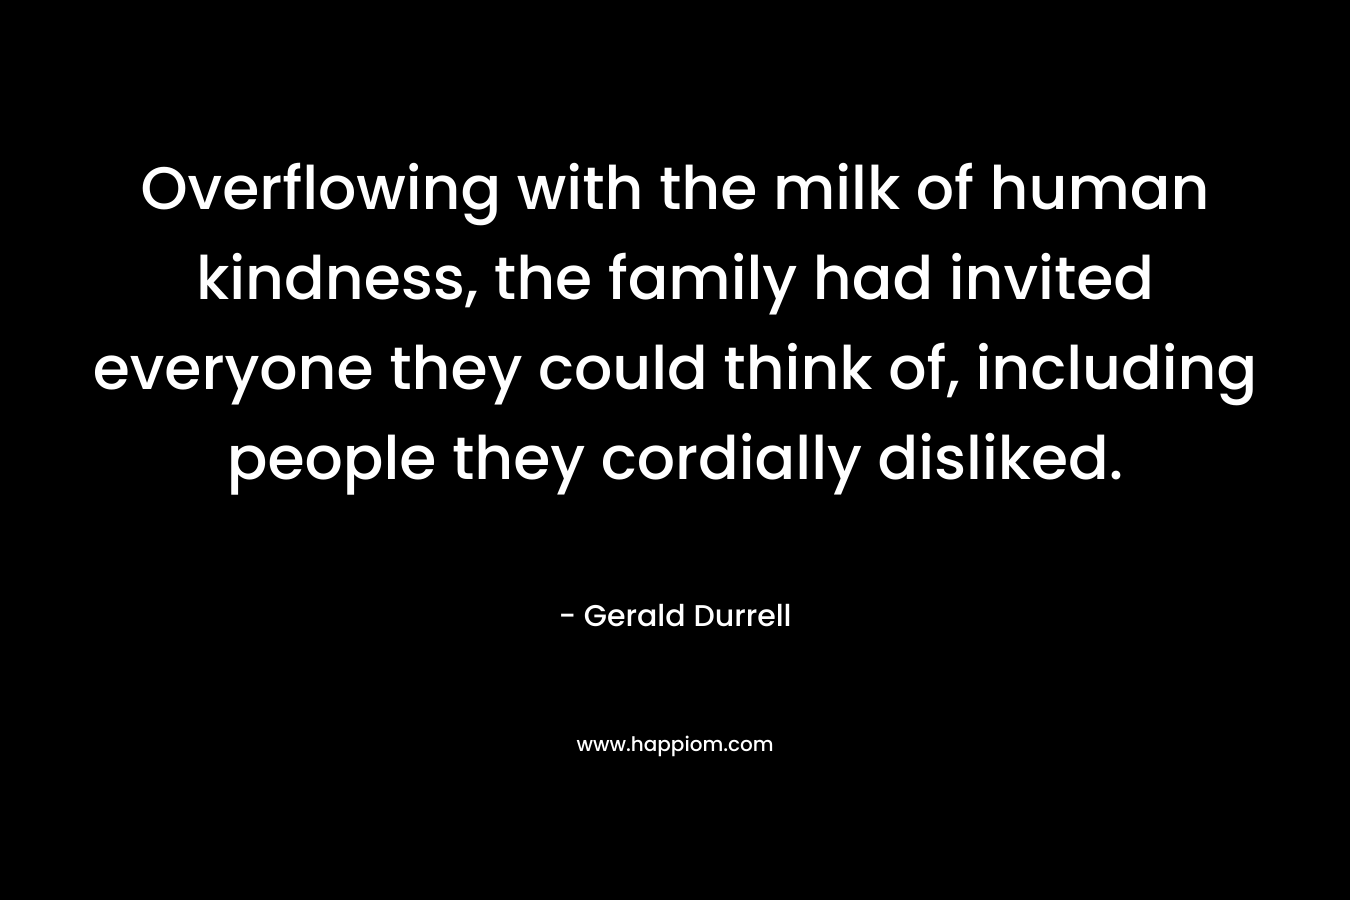 Overflowing with the milk of human kindness, the family had invited everyone they could think of, including people they cordially disliked. – Gerald Durrell